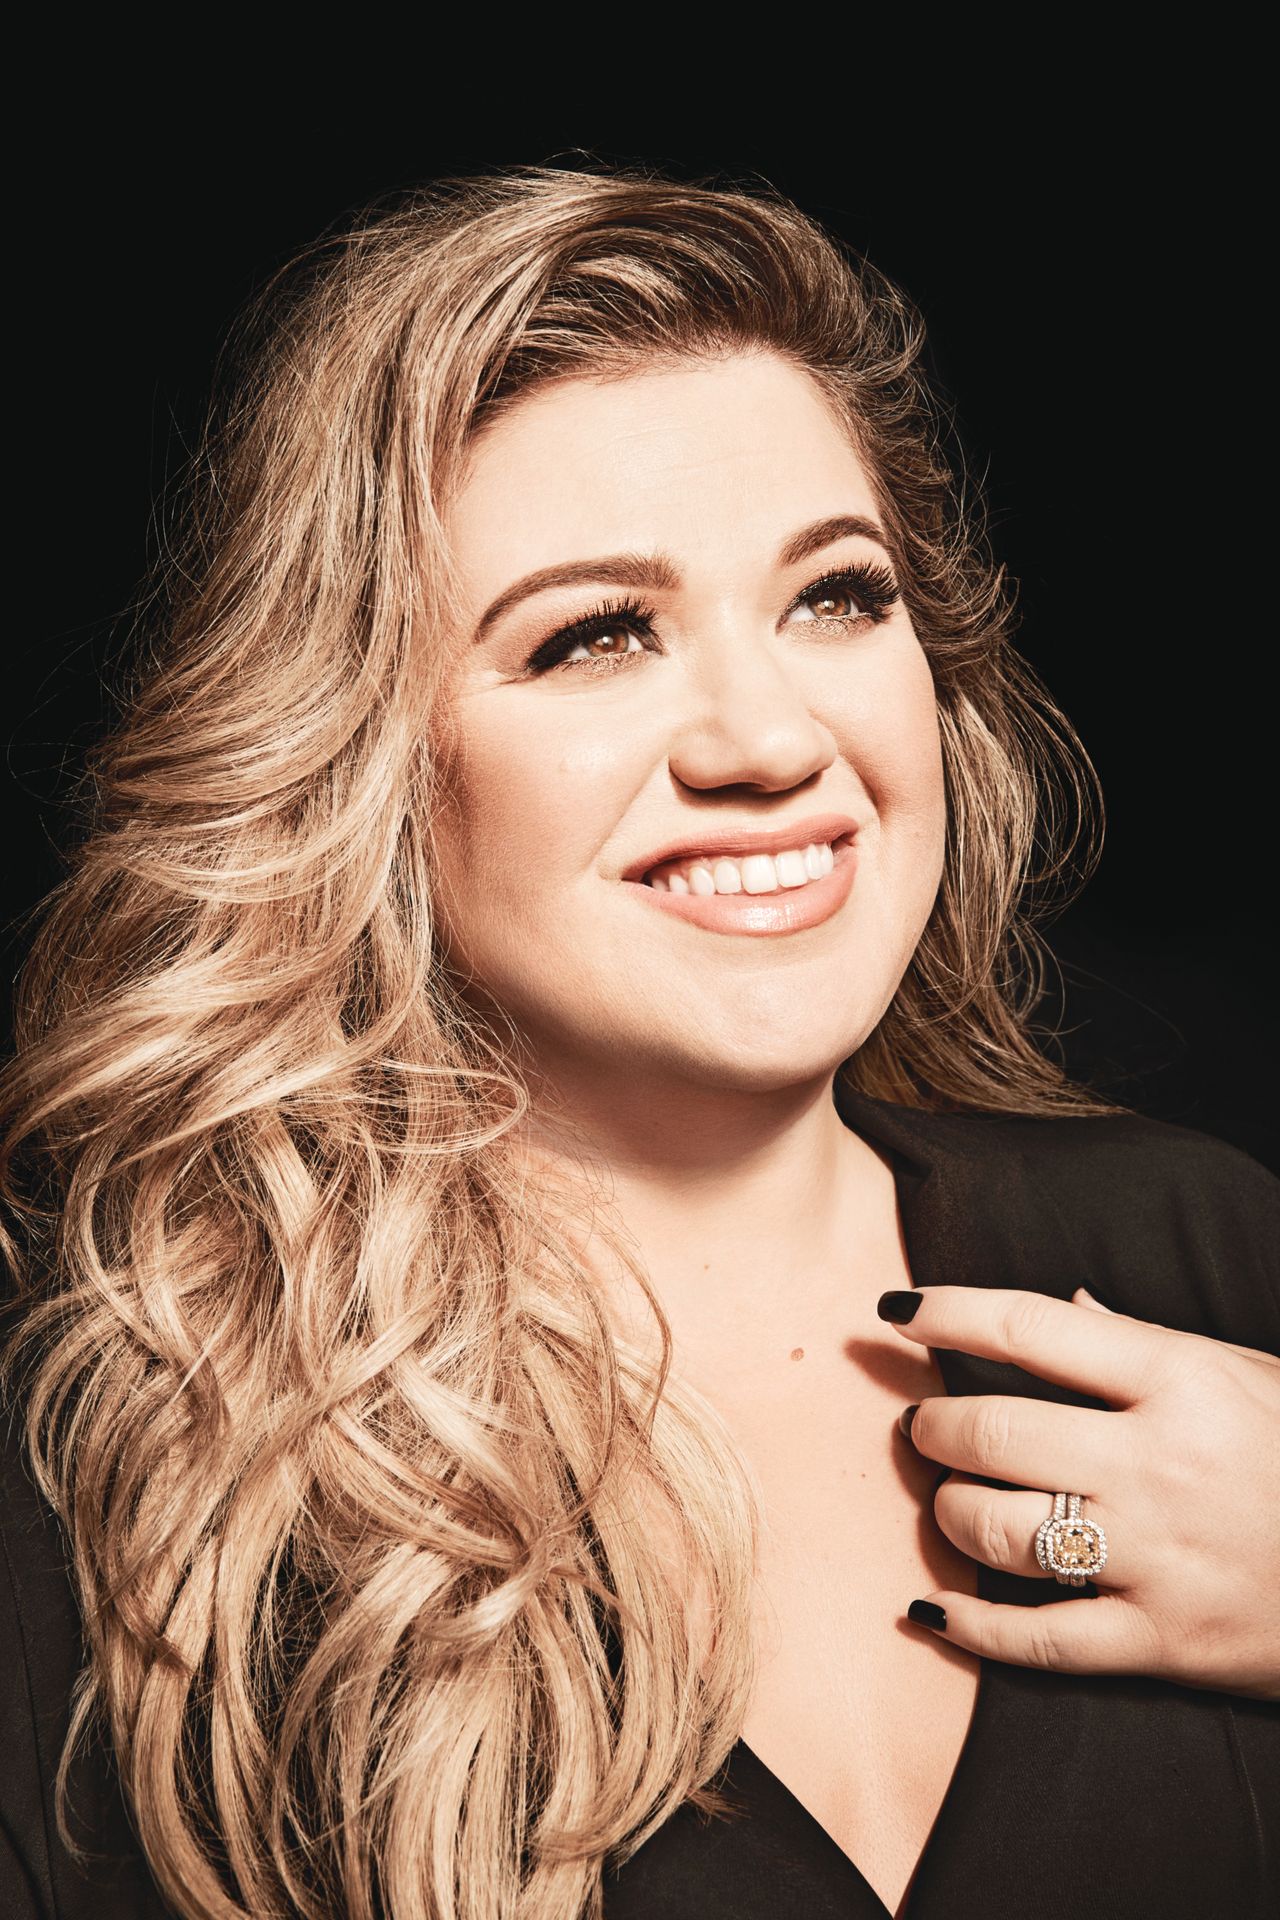 Kelly Clarkson reveals the truth behind her significant weight loss. "I listened to my doctor"